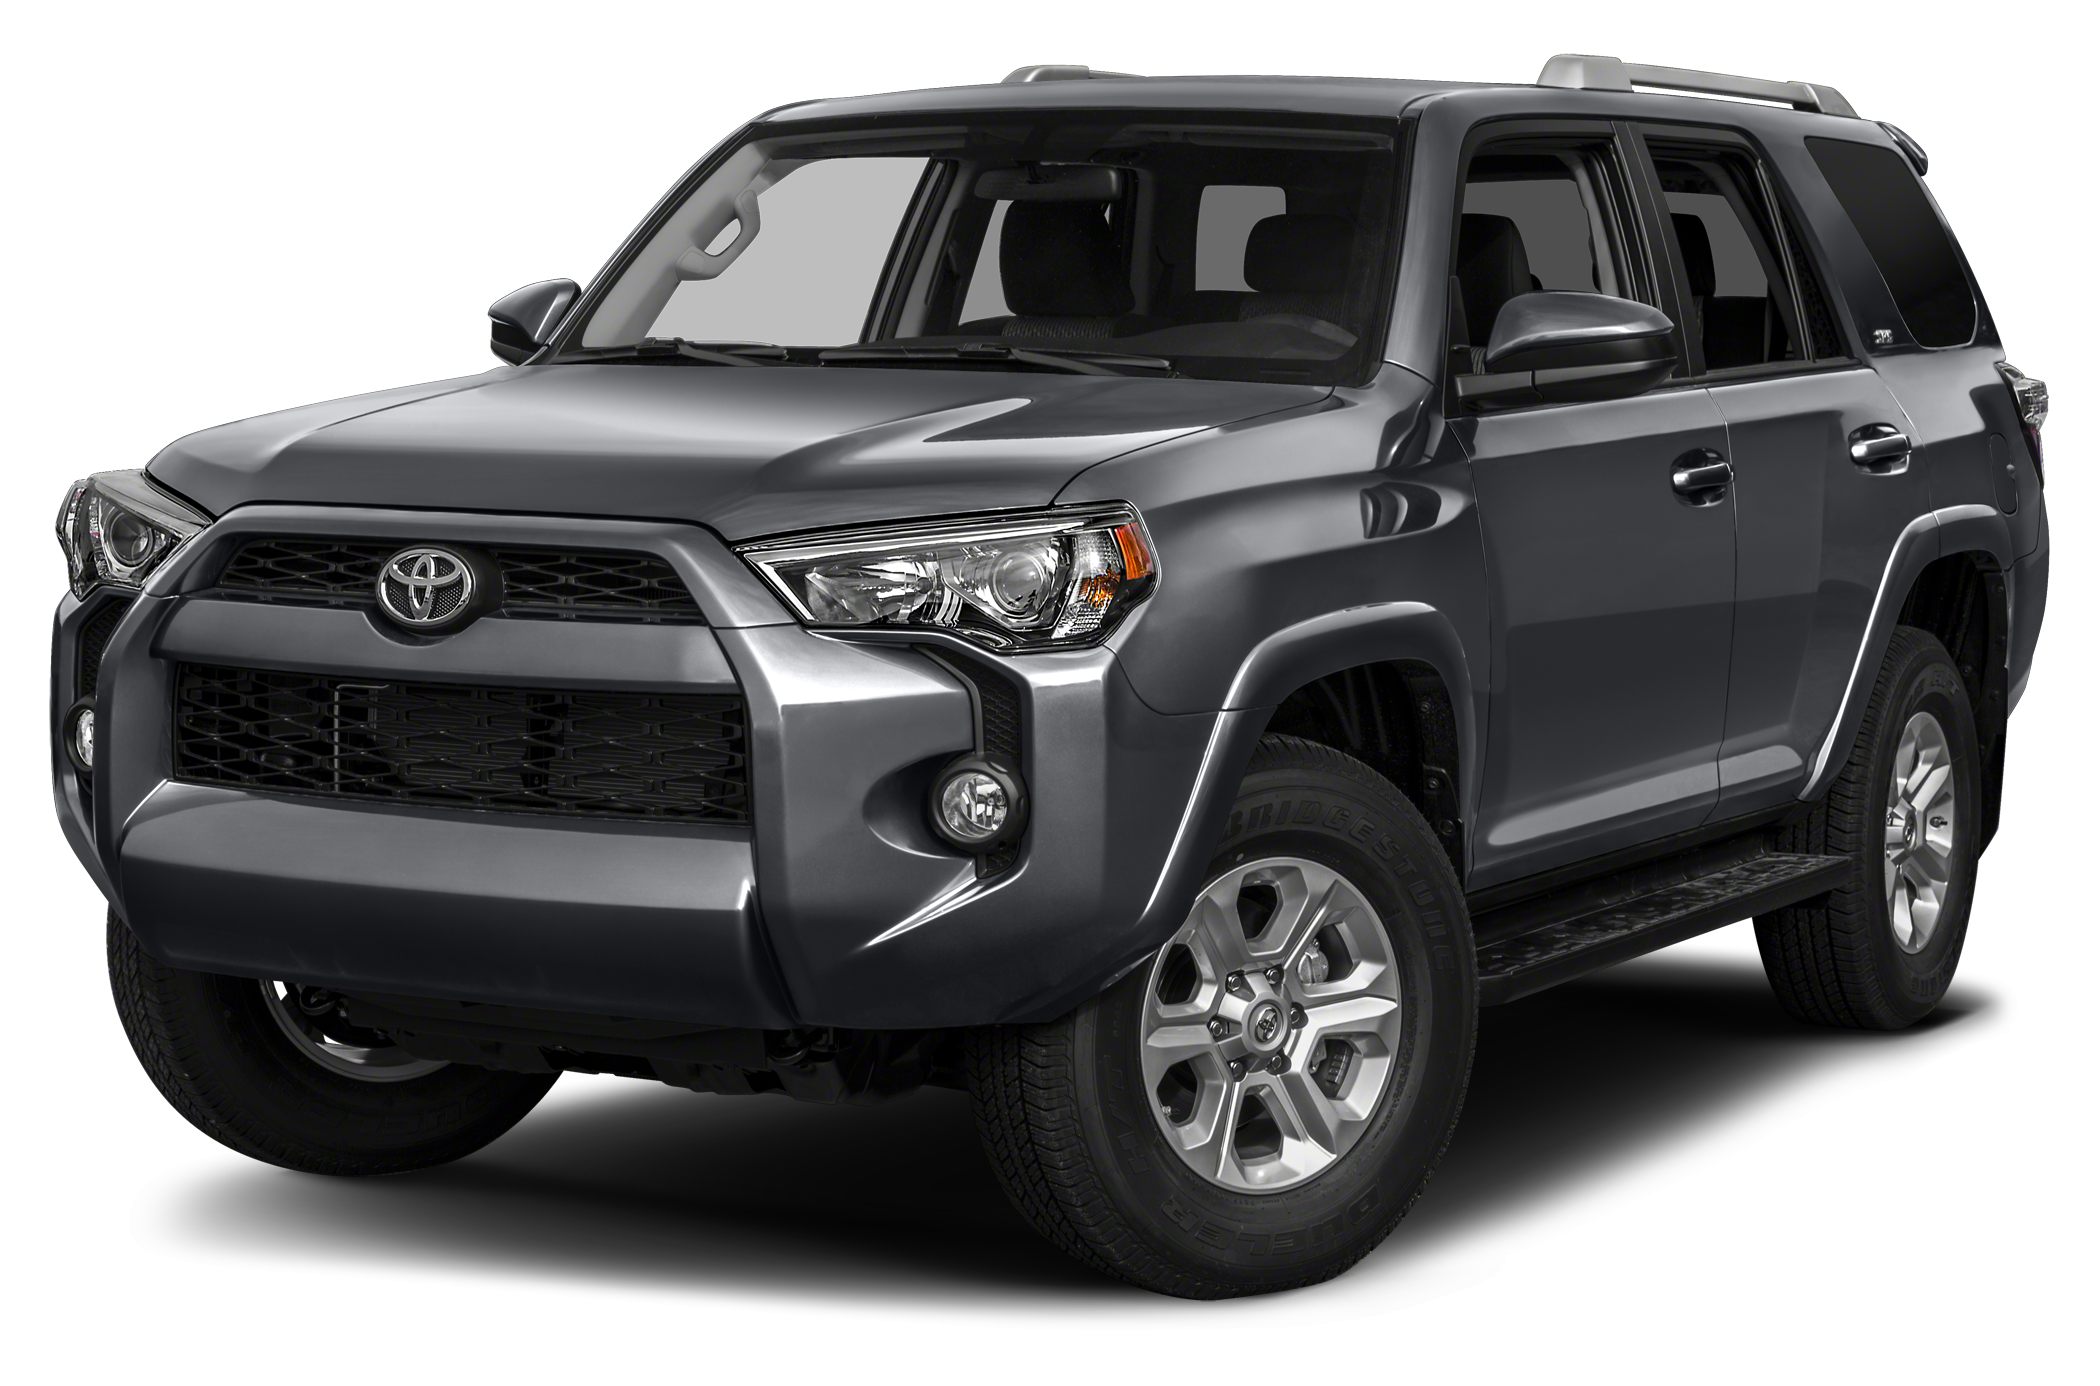 Toyota 4Runner Backgrounds, Compatible - PC, Mobile, Gadgets| 2100x1386 px